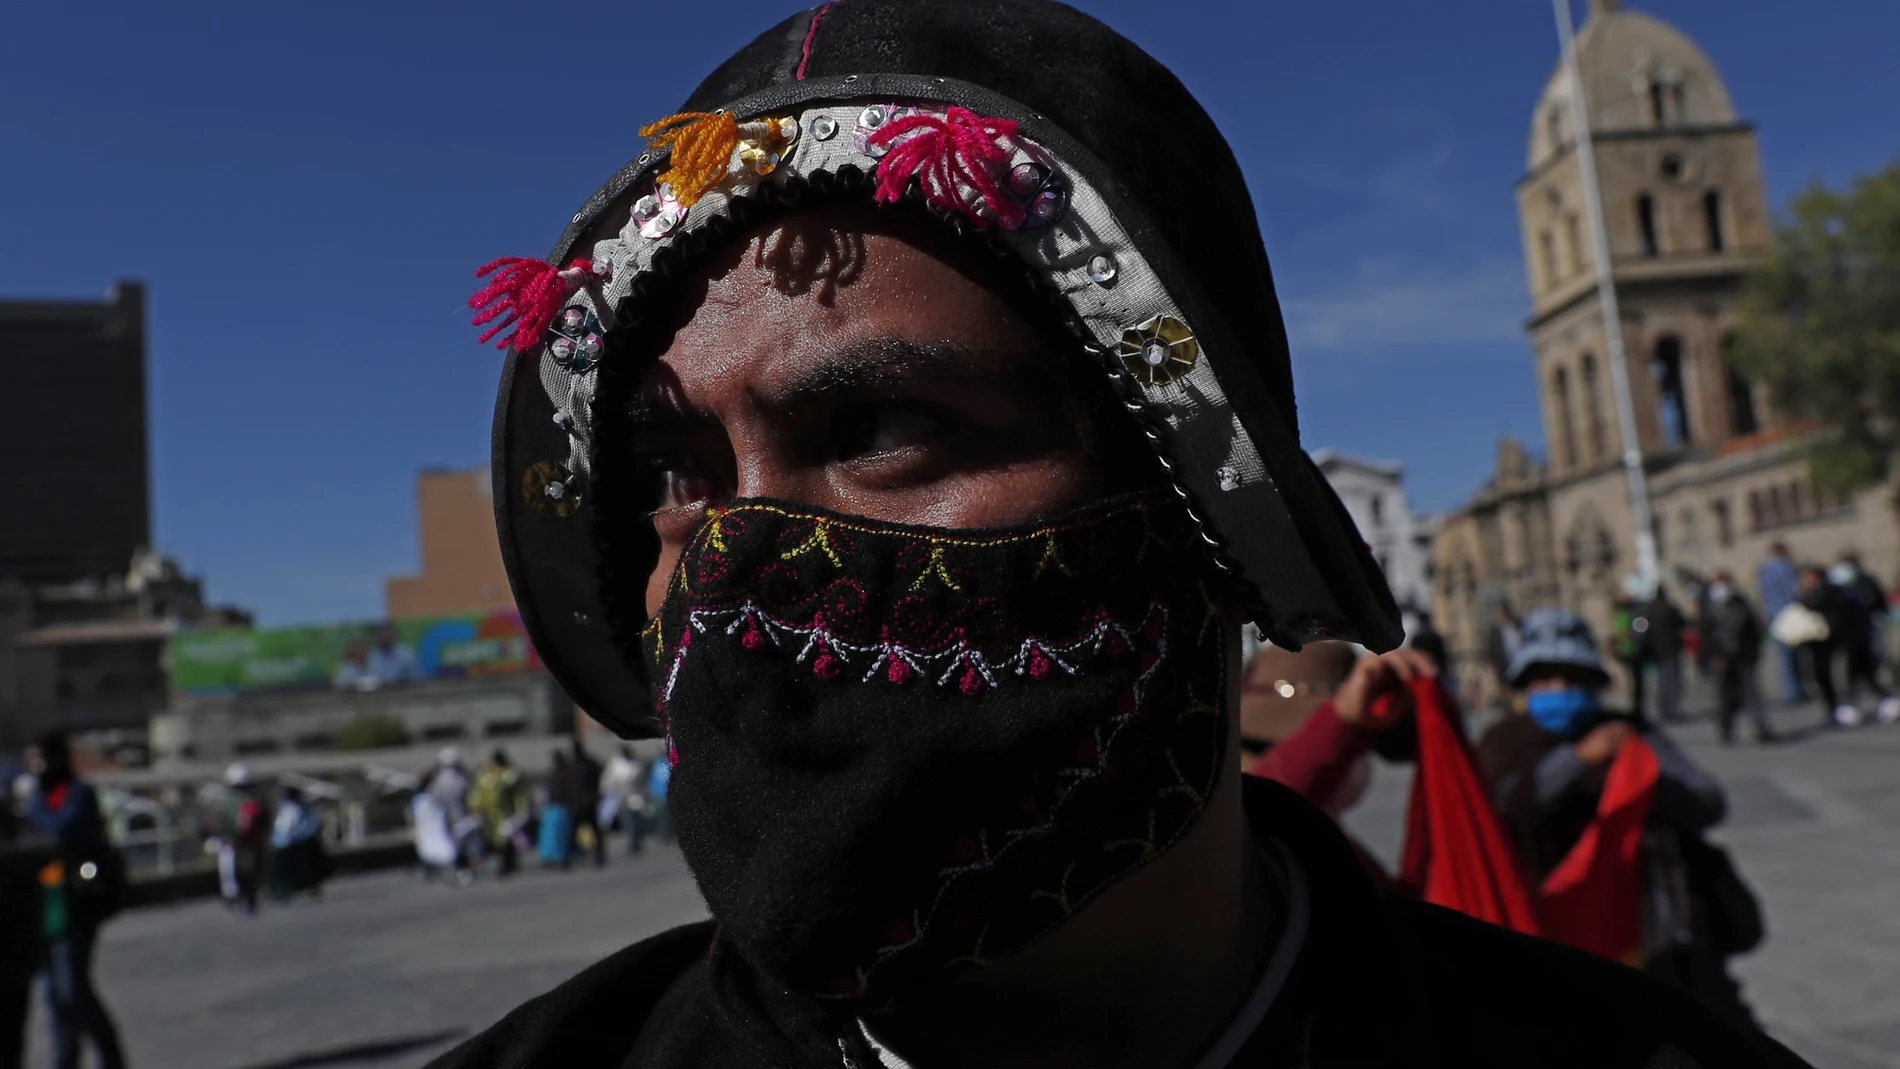 A maker of folklore costumes wearing a face mask amid the new coronavirus pandemic attends a protest against the government's recent closing of the Culture Ministry, and to demand it reopen in La Paz, Bolivia, Monday, June 15, 2020. The government has closed the ministries of culture, sports, and communication, citing the need to cut costs. (AP Photo/Juan Karita)